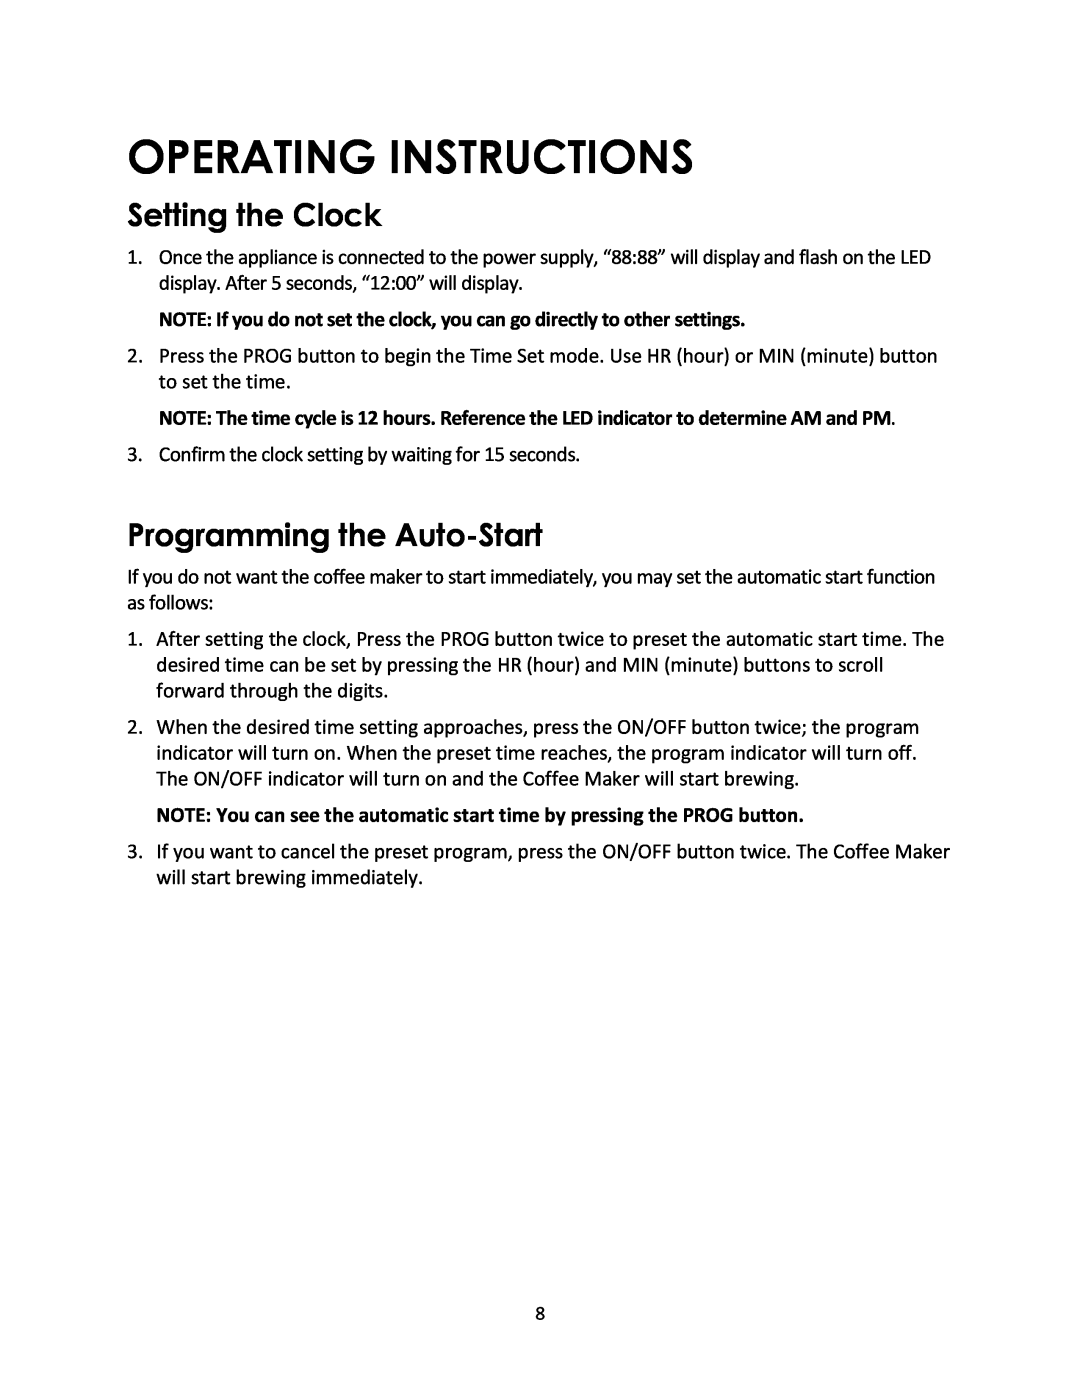 Magic Chef MCSCM10PGBST instruction manual Operating Instructions, Setting the Clock, Programming the Auto-Start 